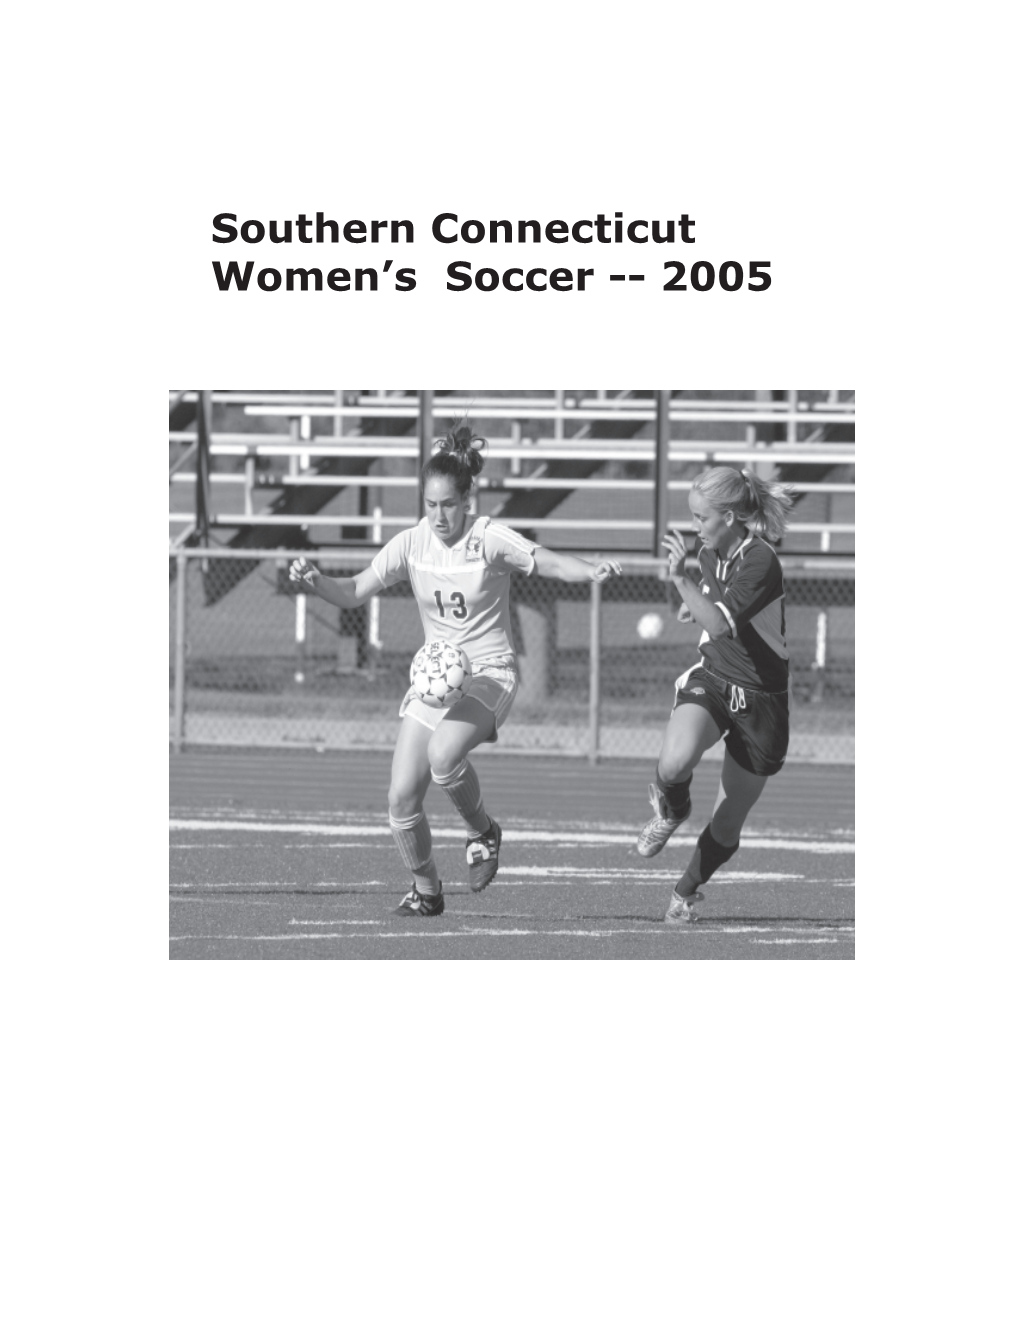 Southern Connecticut Women's Soccer -- 2005